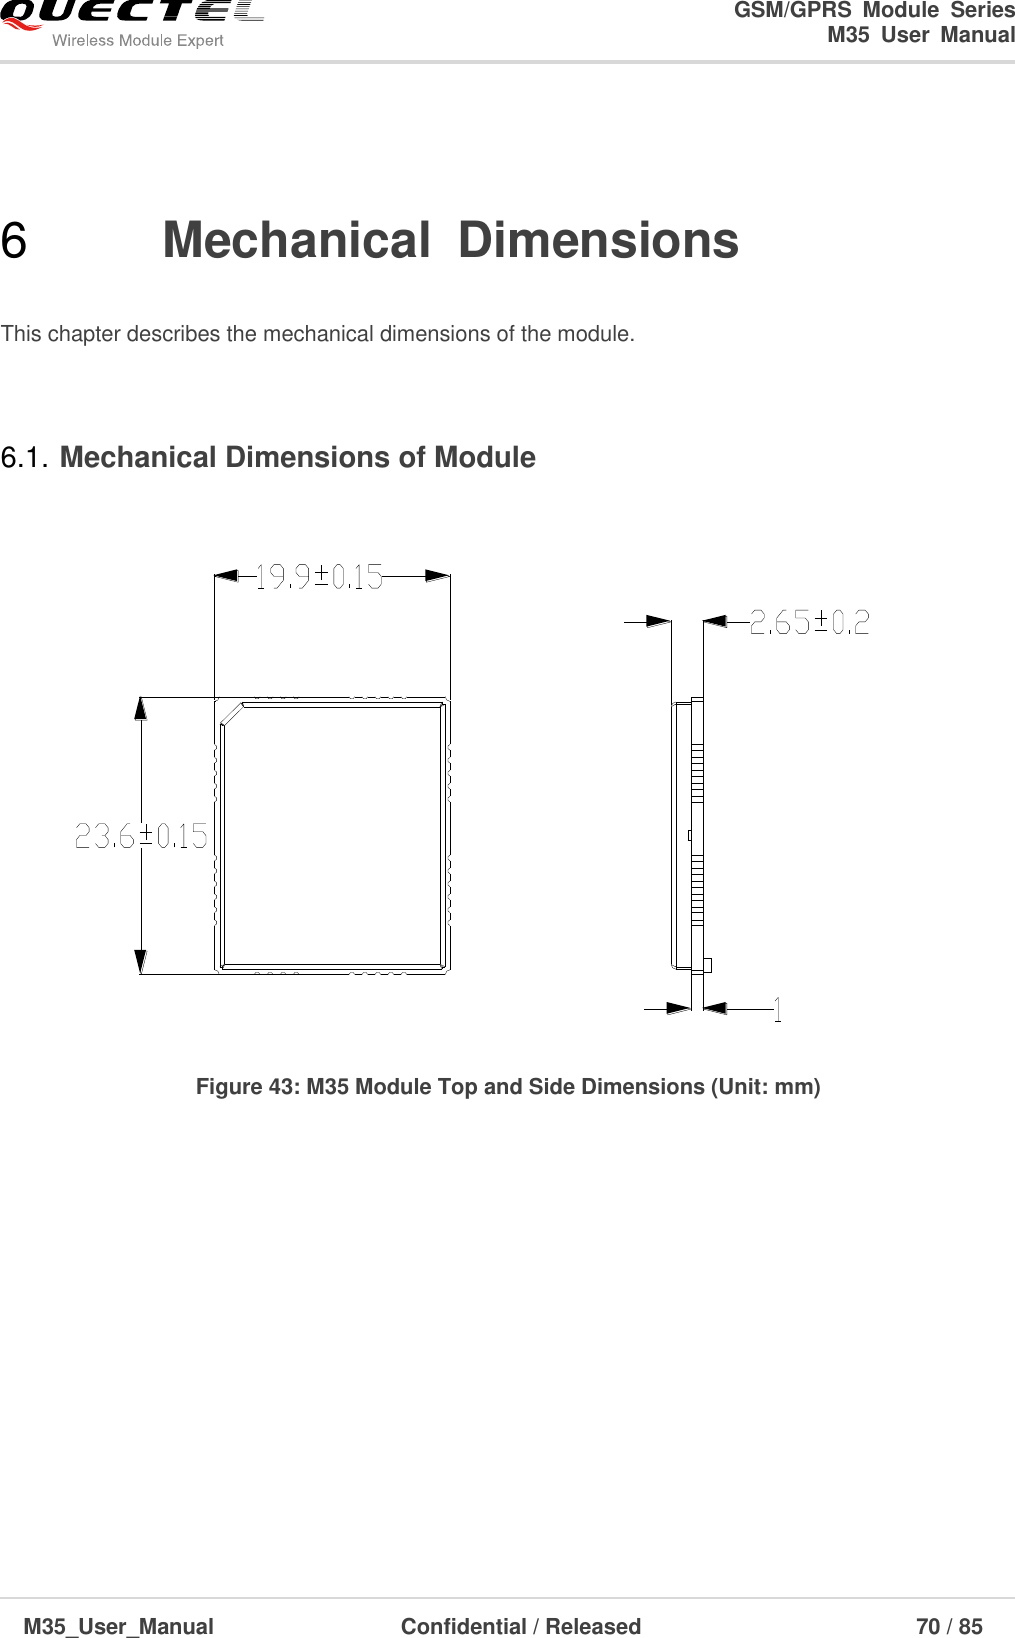                                                                              GSM/GPRS  Module  Series                                                                 M35  User  Manual  M35_User_Manual                                  Confidential / Released                             70 / 85    6  Mechanical  Dimensions  This chapter describes the mechanical dimensions of the module.  6.1. Mechanical Dimensions of Module   Figure 43: M35 Module Top and Side Dimensions (Unit: mm)             